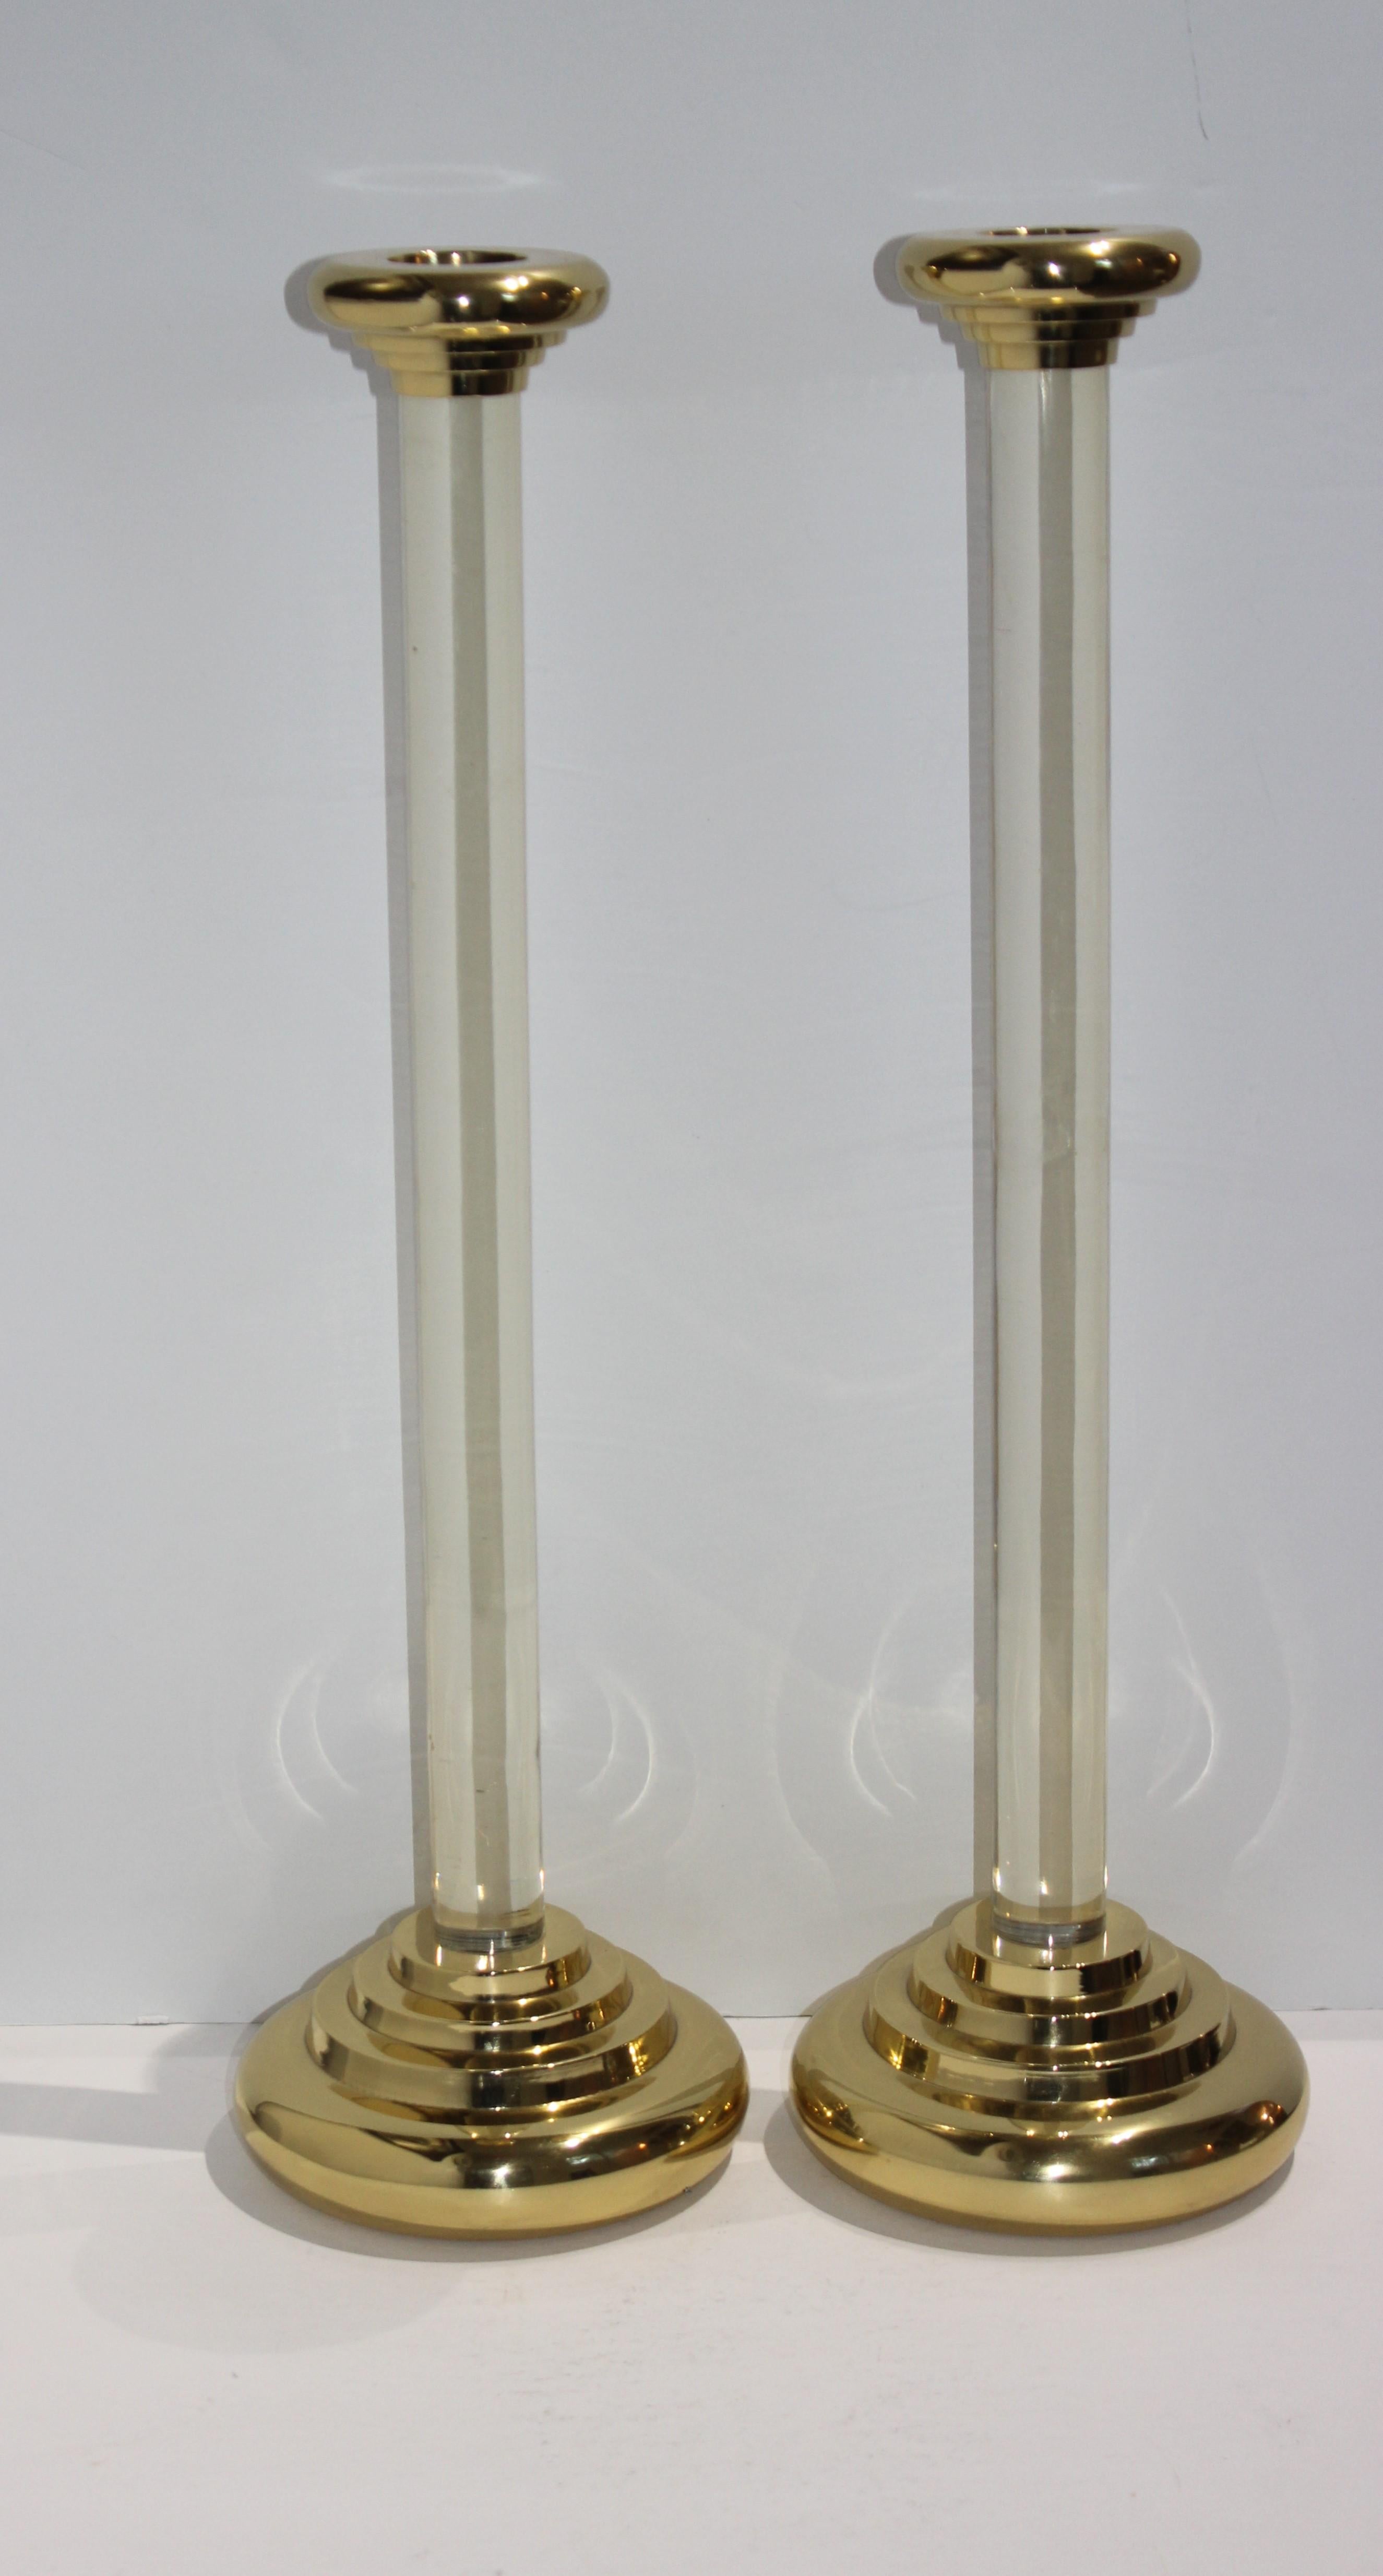 This stylish, large scale pair of candlesticks are very much in the style of pieces created by Karl Springer in the 1980s.

Note: The brass has been professionally polished and lacquered (no tarnishing).